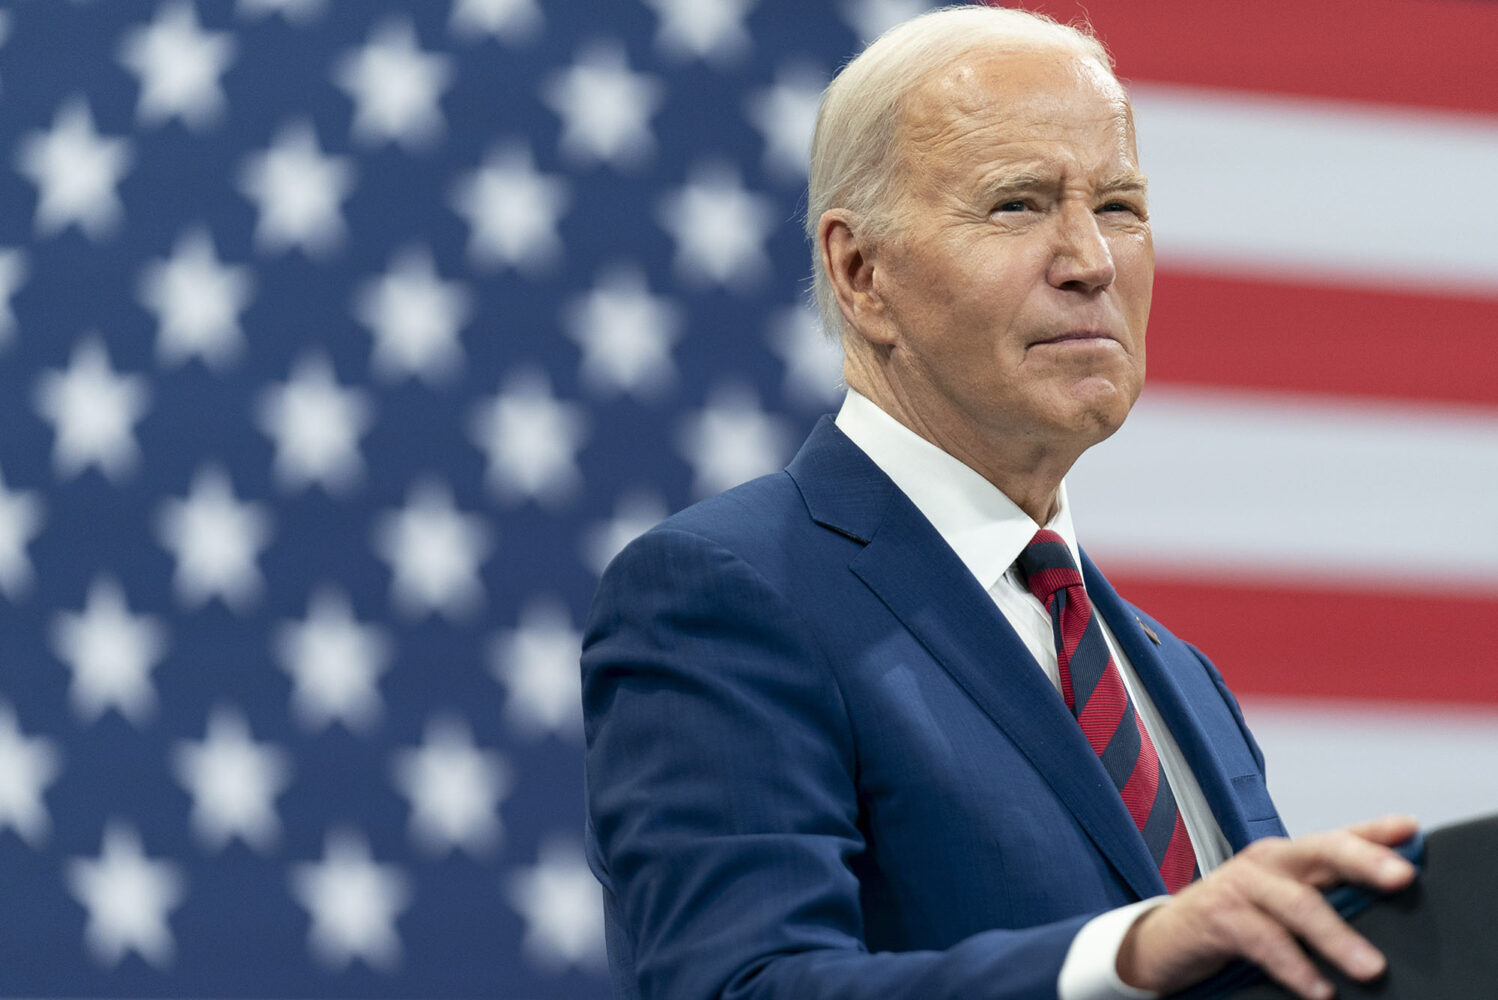 Photo: President Joe Biden delivers remarks during a campaign event with Vice President Kamala Harris in Raleigh, N.C. He stands in front of an American flag with a navy suit and red tie.